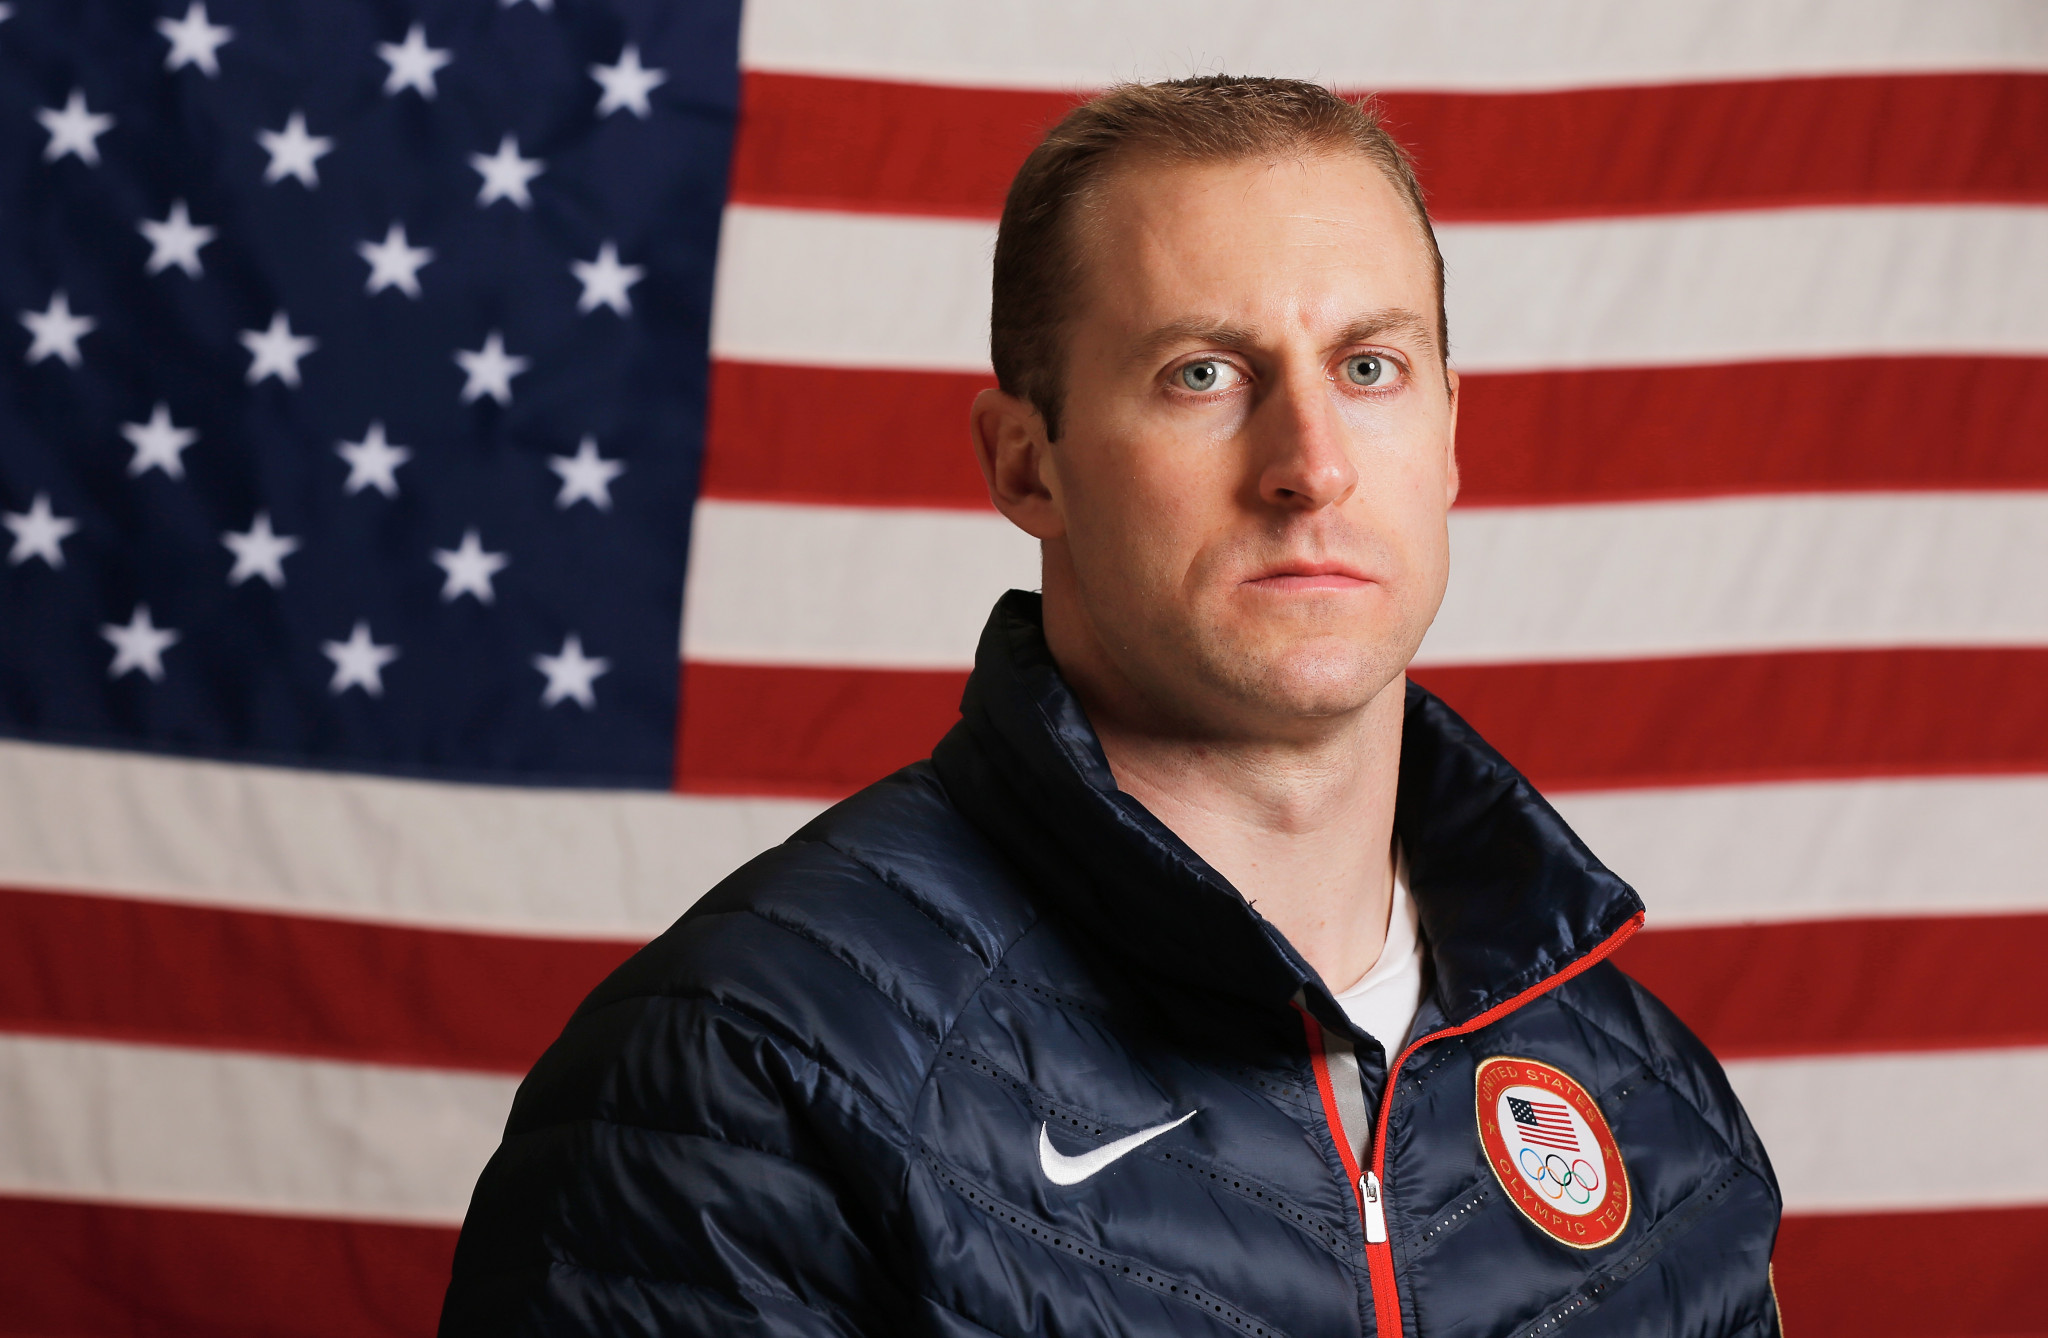 Olympic gold medallist Tomasevicz joins USA Bobsled and Skeleton as director of sports performance